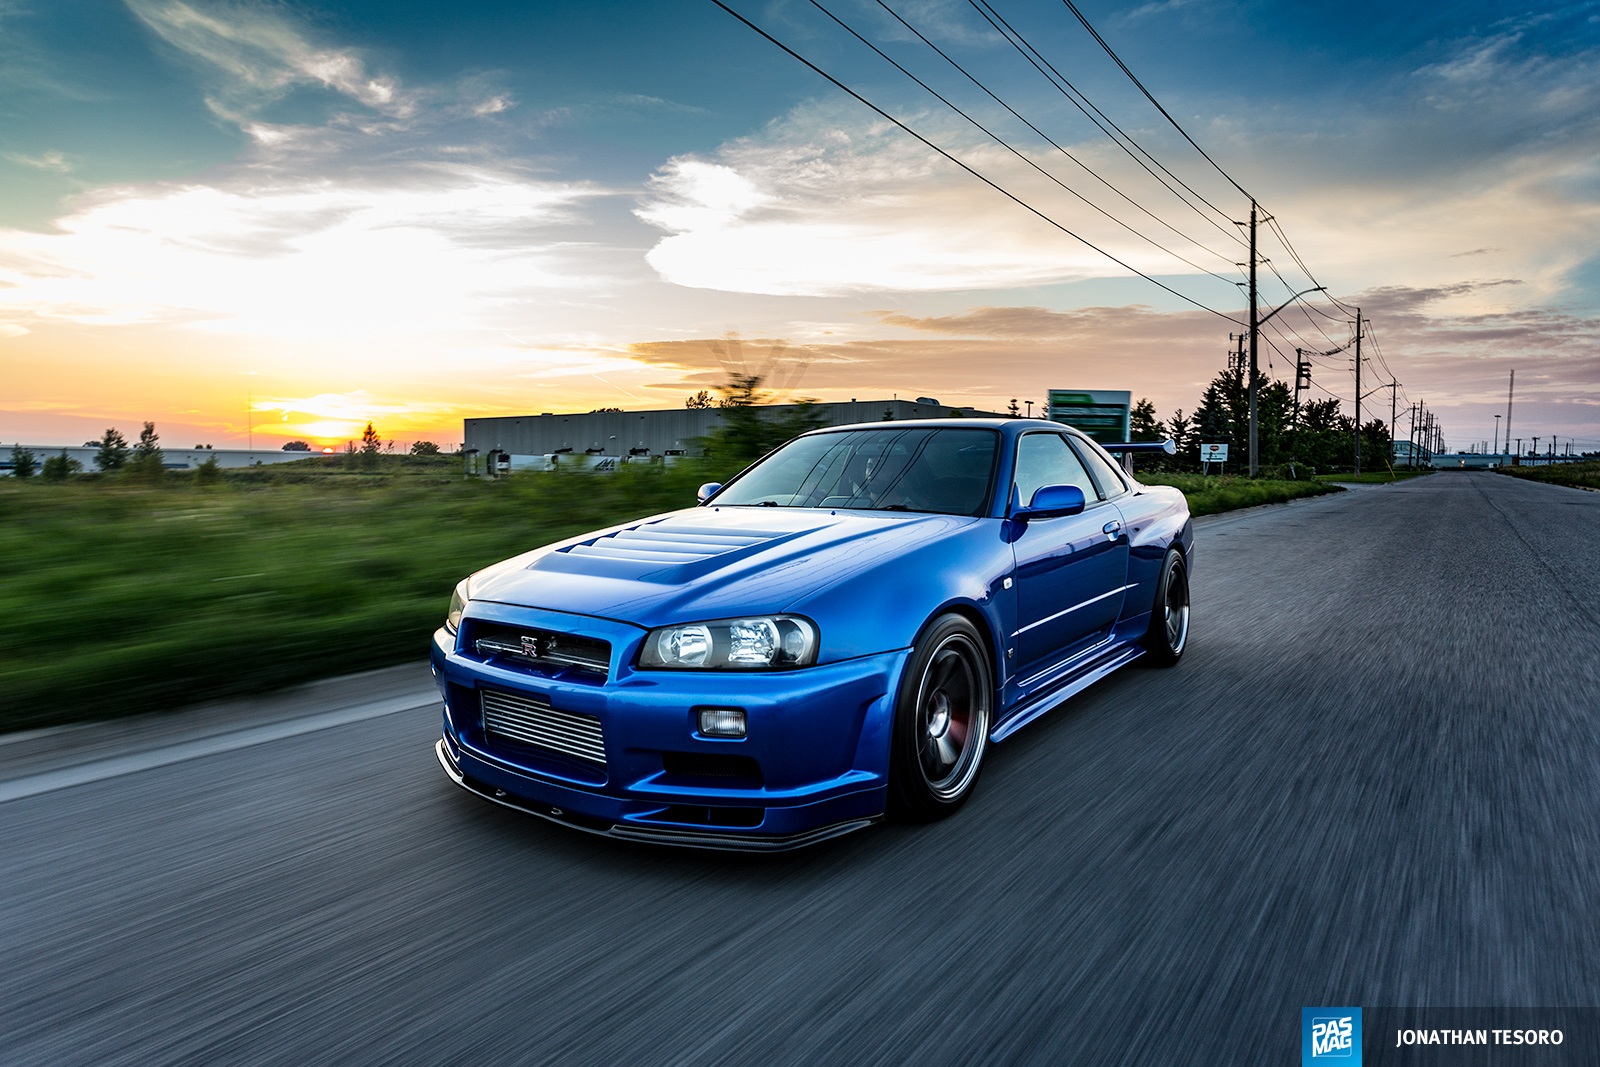 R34lest Darren Shady S 1999 Nissan Skyline Gt R Pasmag Is The Tuner S Source For Modified Car Culture Since 1999